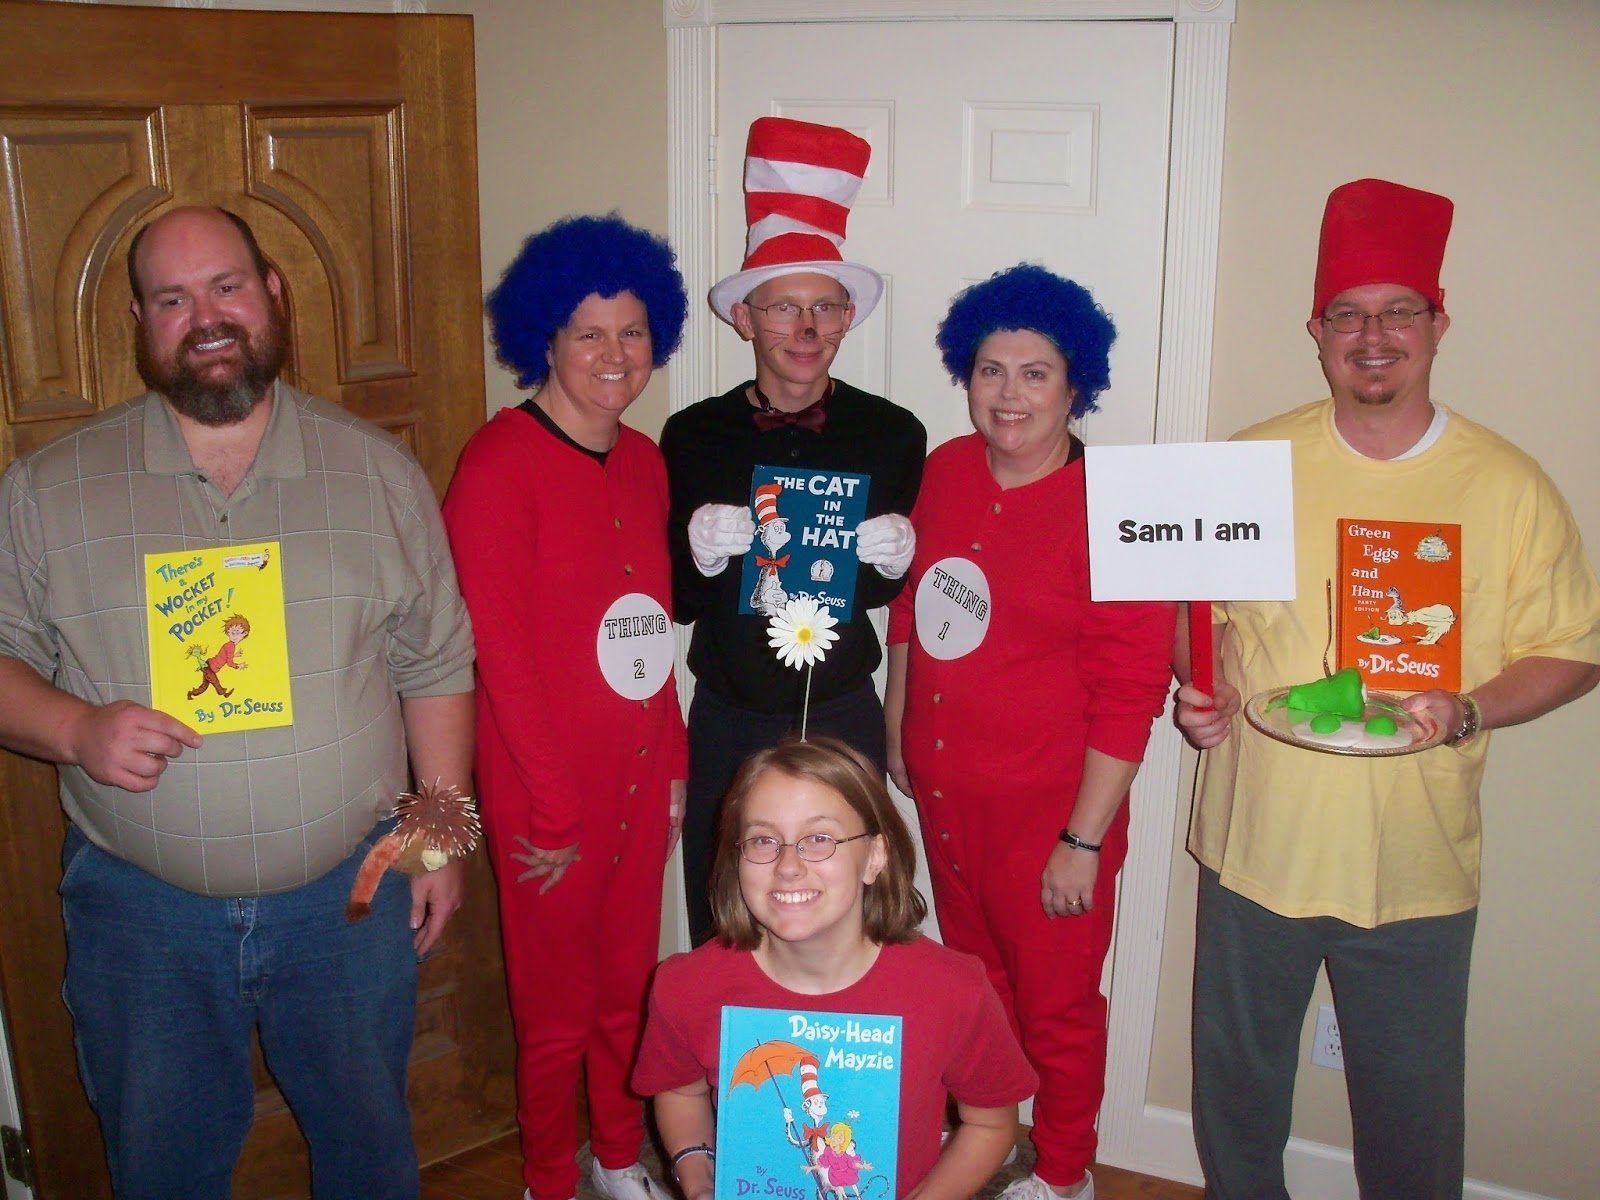 10 Best Dr Seuss Characters Costume Ideas everybodys aunt andi halloween costume and party ideas dr seuss 1 2022